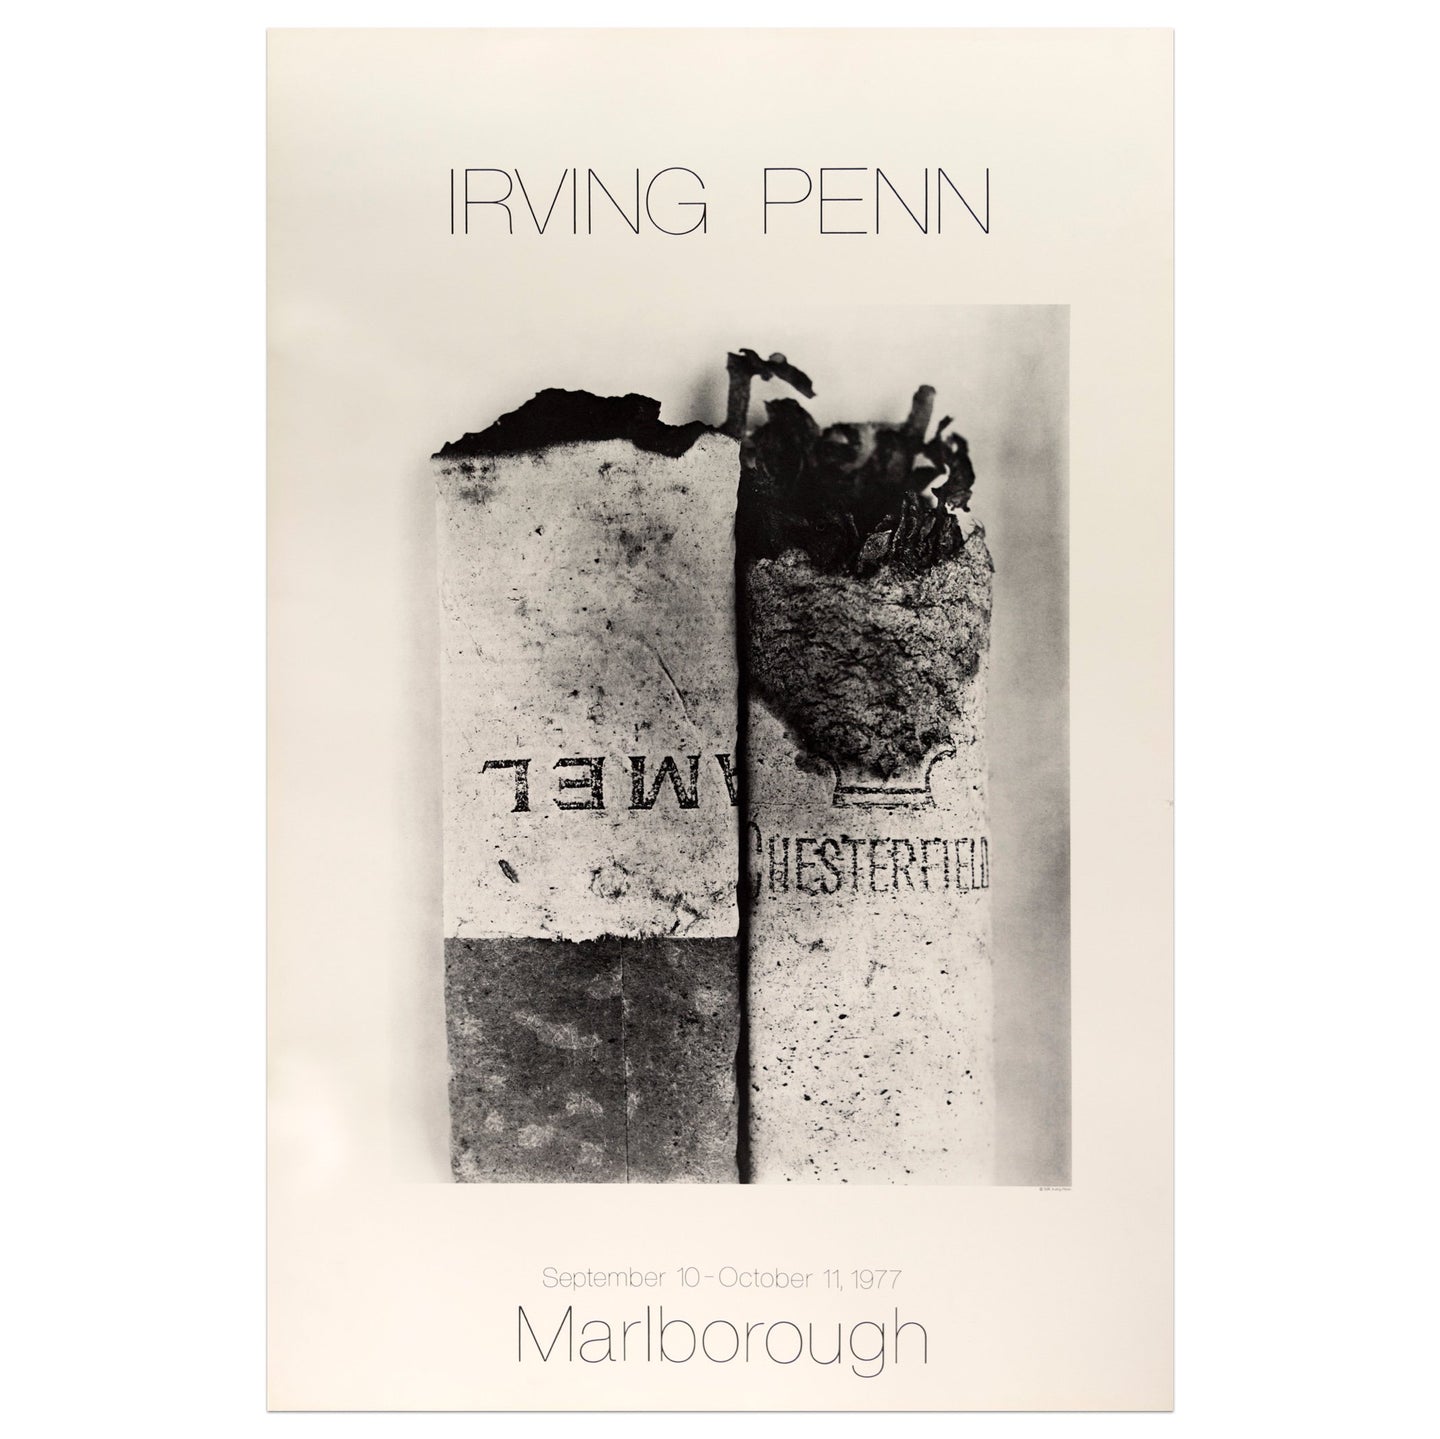 1977 Marlborough poster for Irving Penn featuring a black and white photographic of cigarette butts